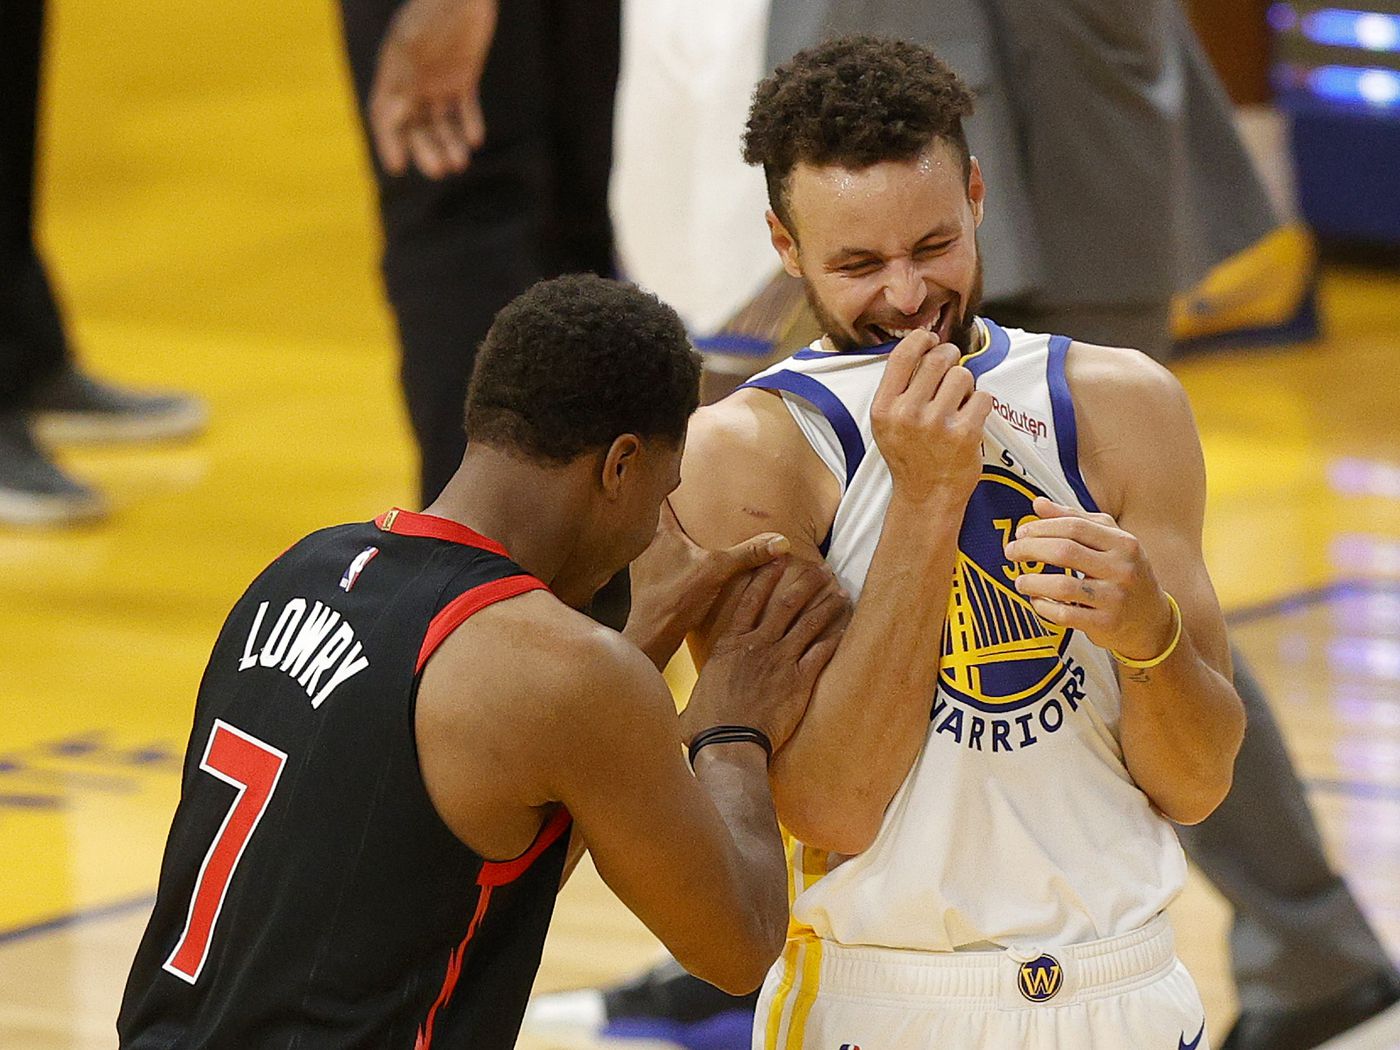 Kyle Lowry and Stephen Curry